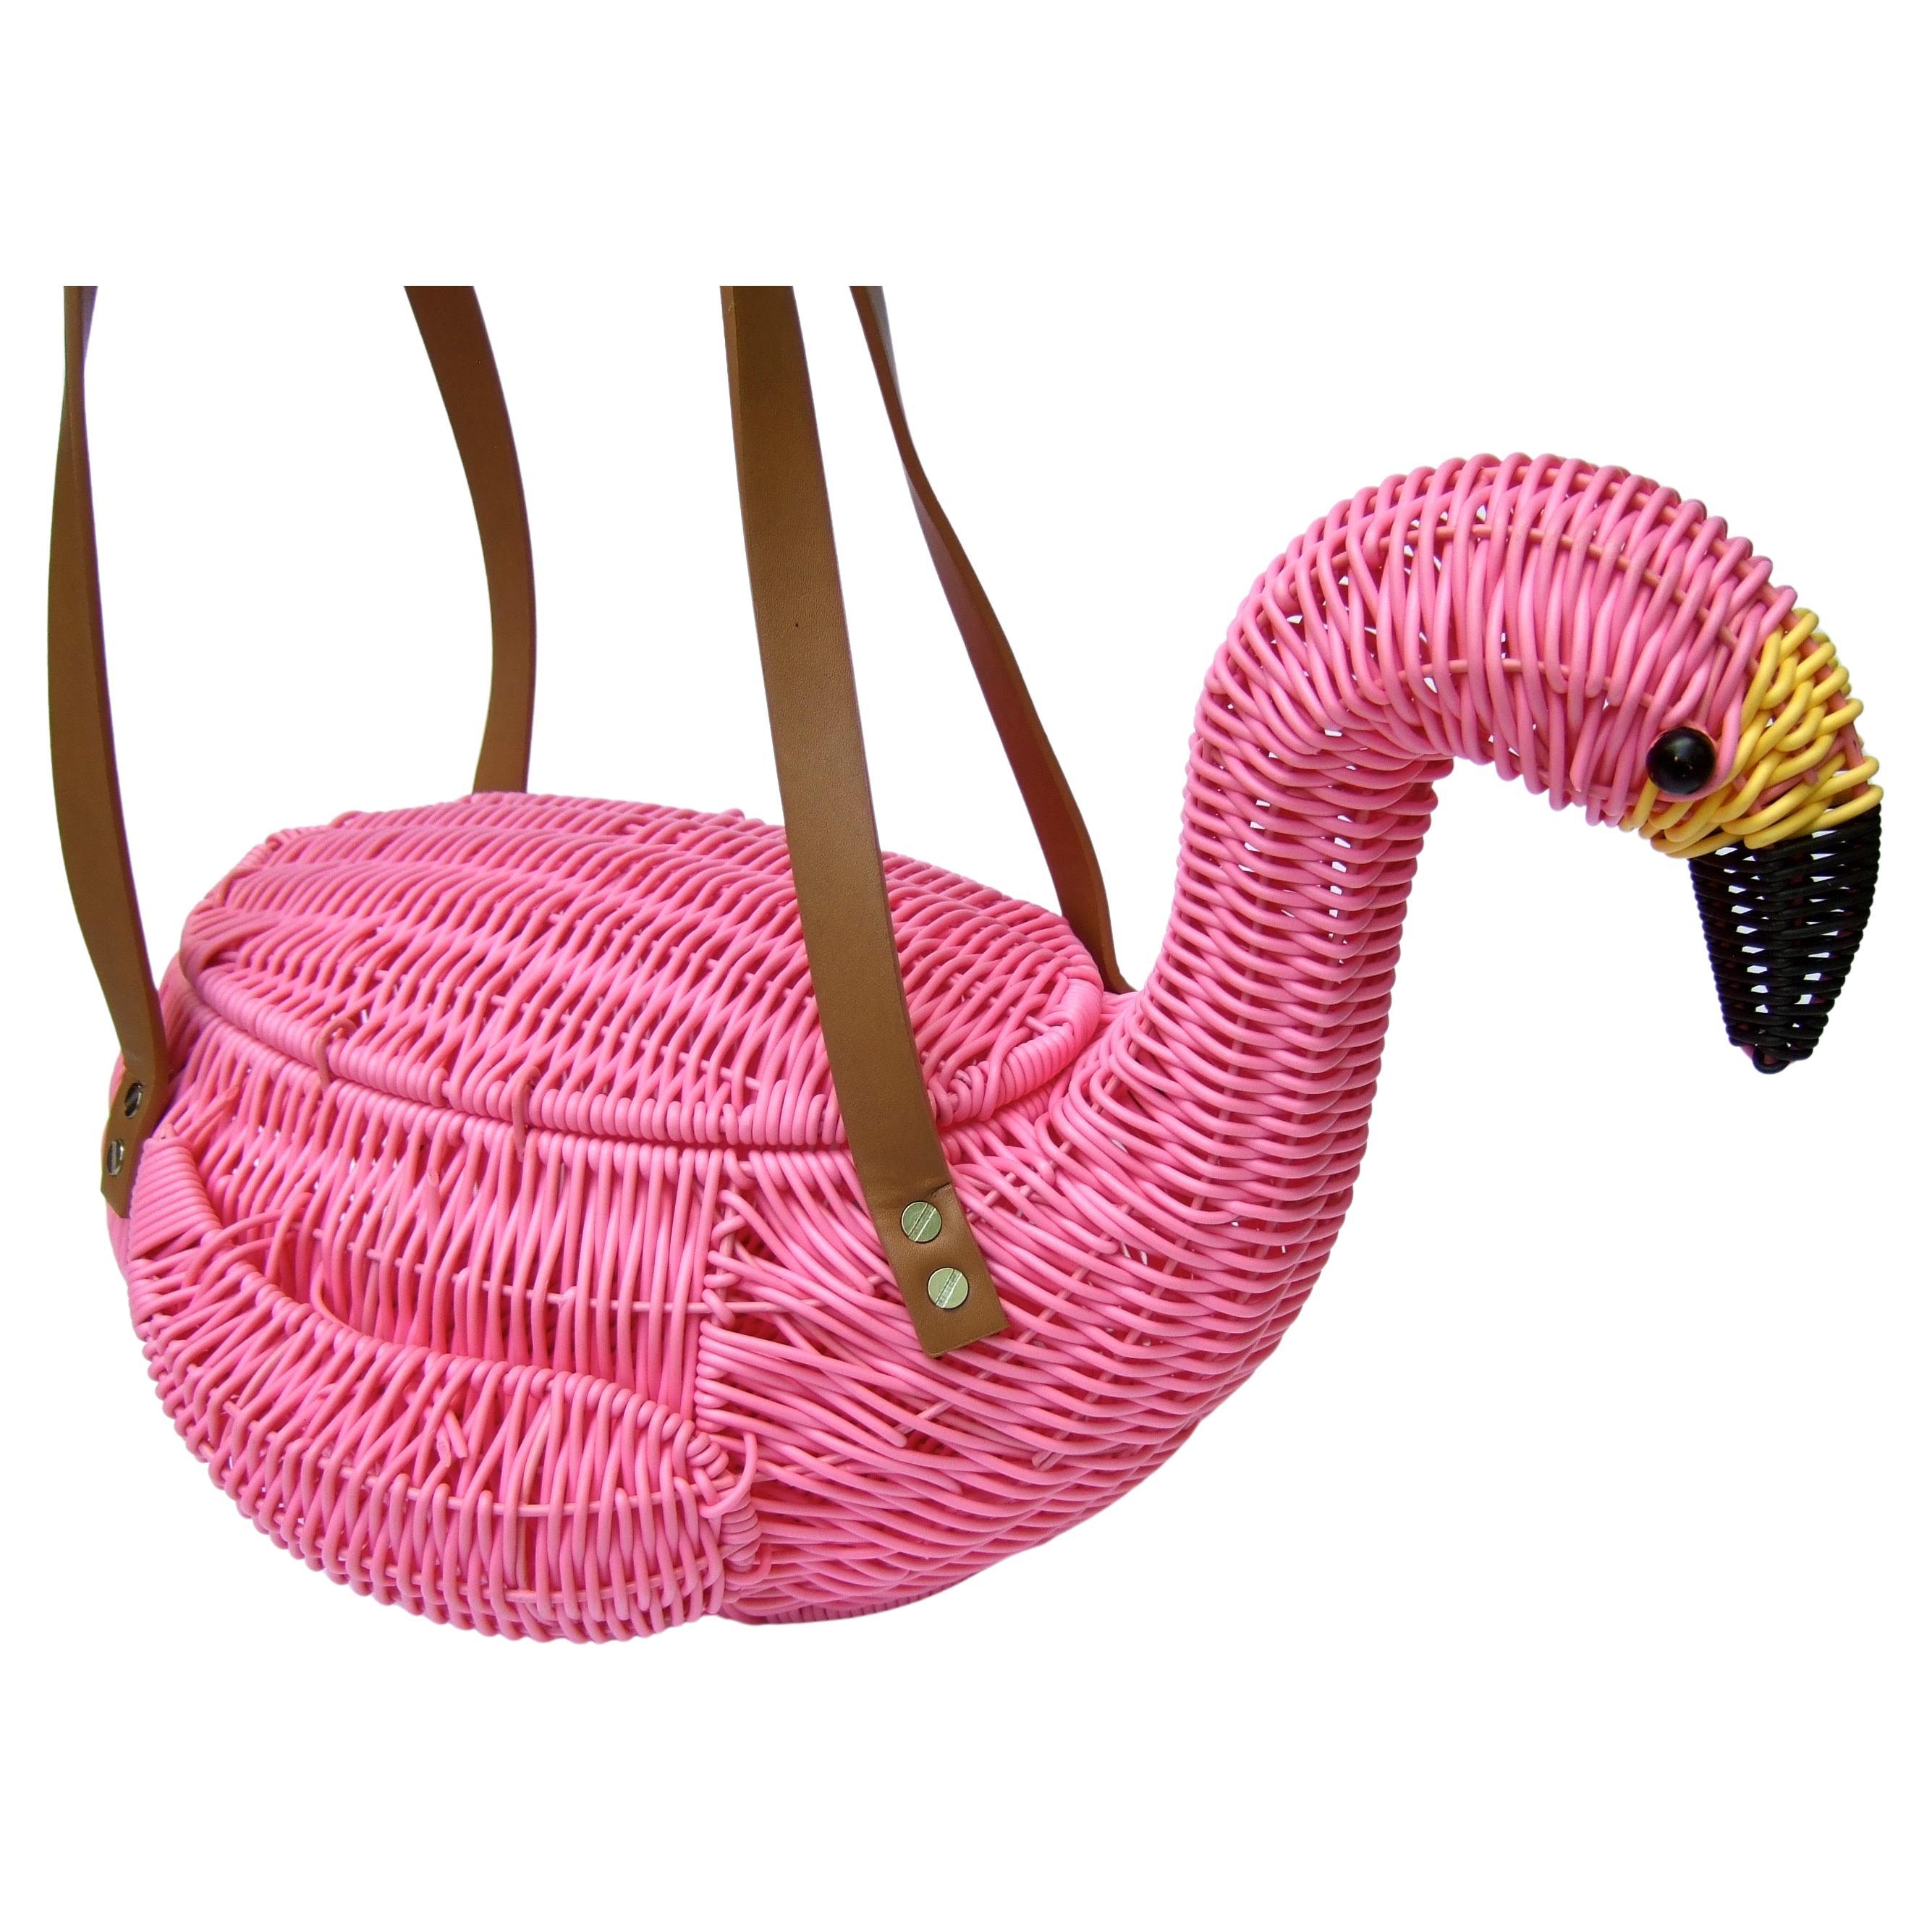 Whimsical pink wicker flamingo large basket style handbag c 21st c 
The unique pink wicker large size flamingo handbag is carried
with a pair of brown rubber handle straps 

Makes a fun quirky large -scale handbag; it too makes a charming
decorative